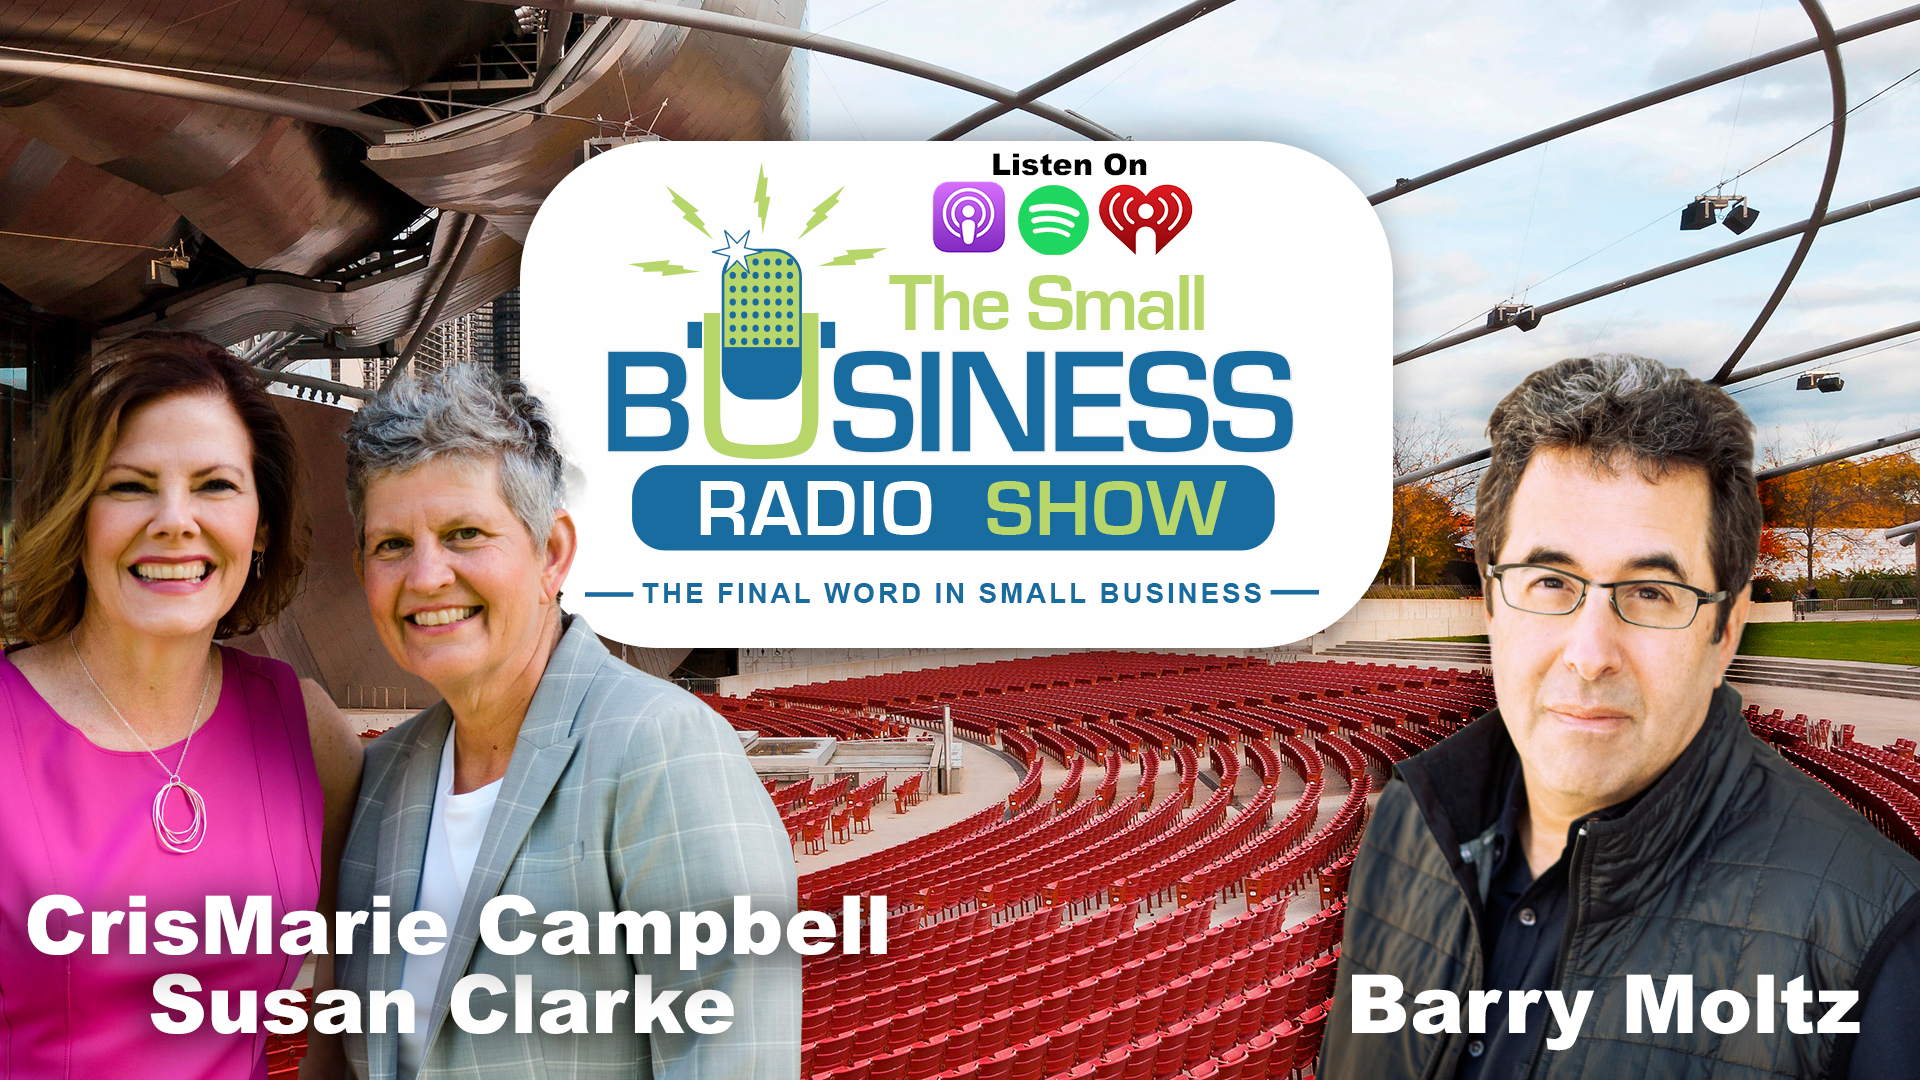 CrisMarie Campbell and Susan Clarke on The Small Business Radio Show